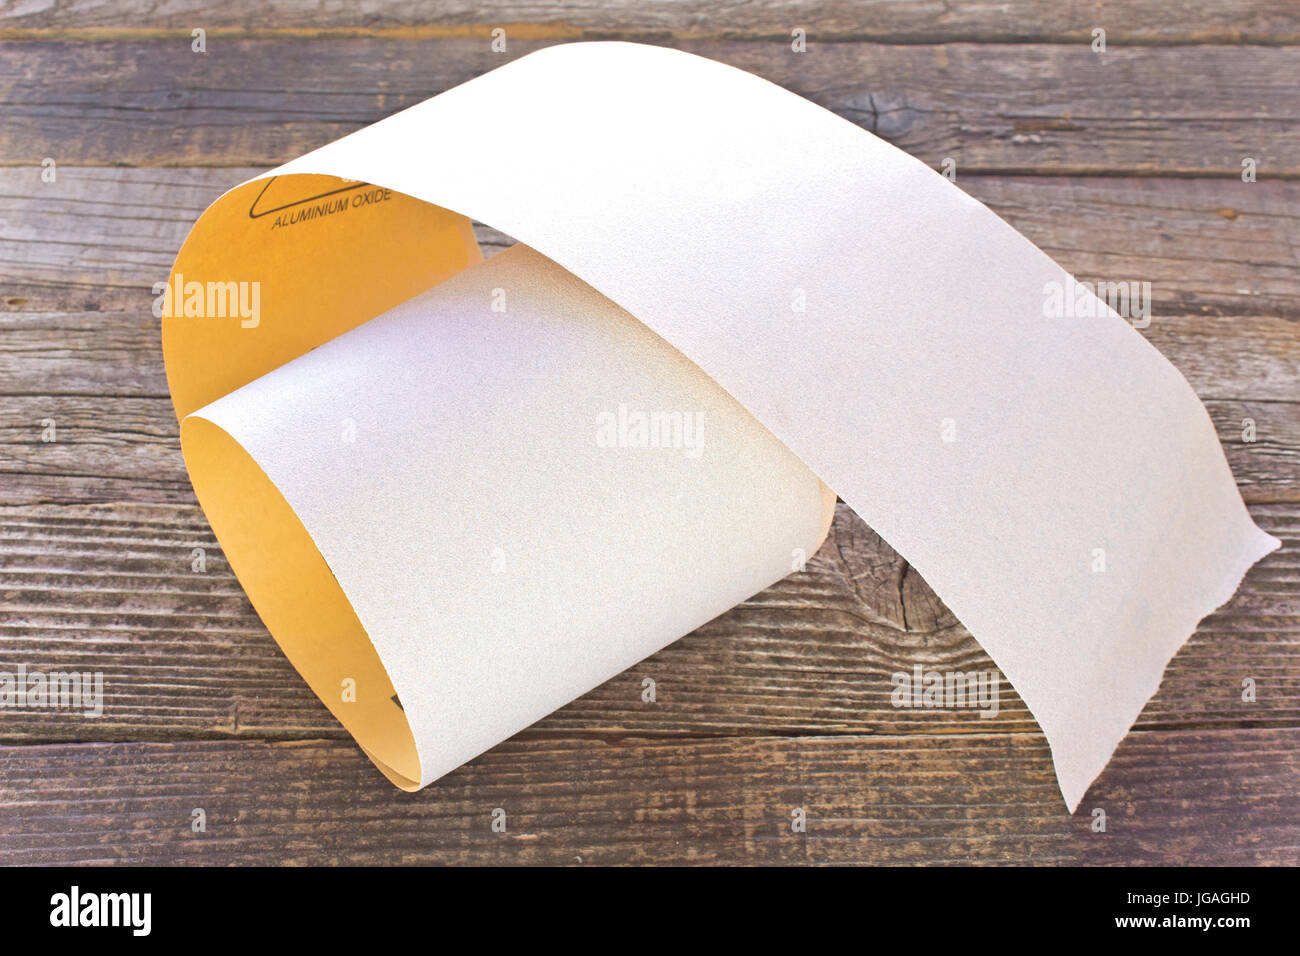 Emery paper - sandpaper on wooden board Stock Photo